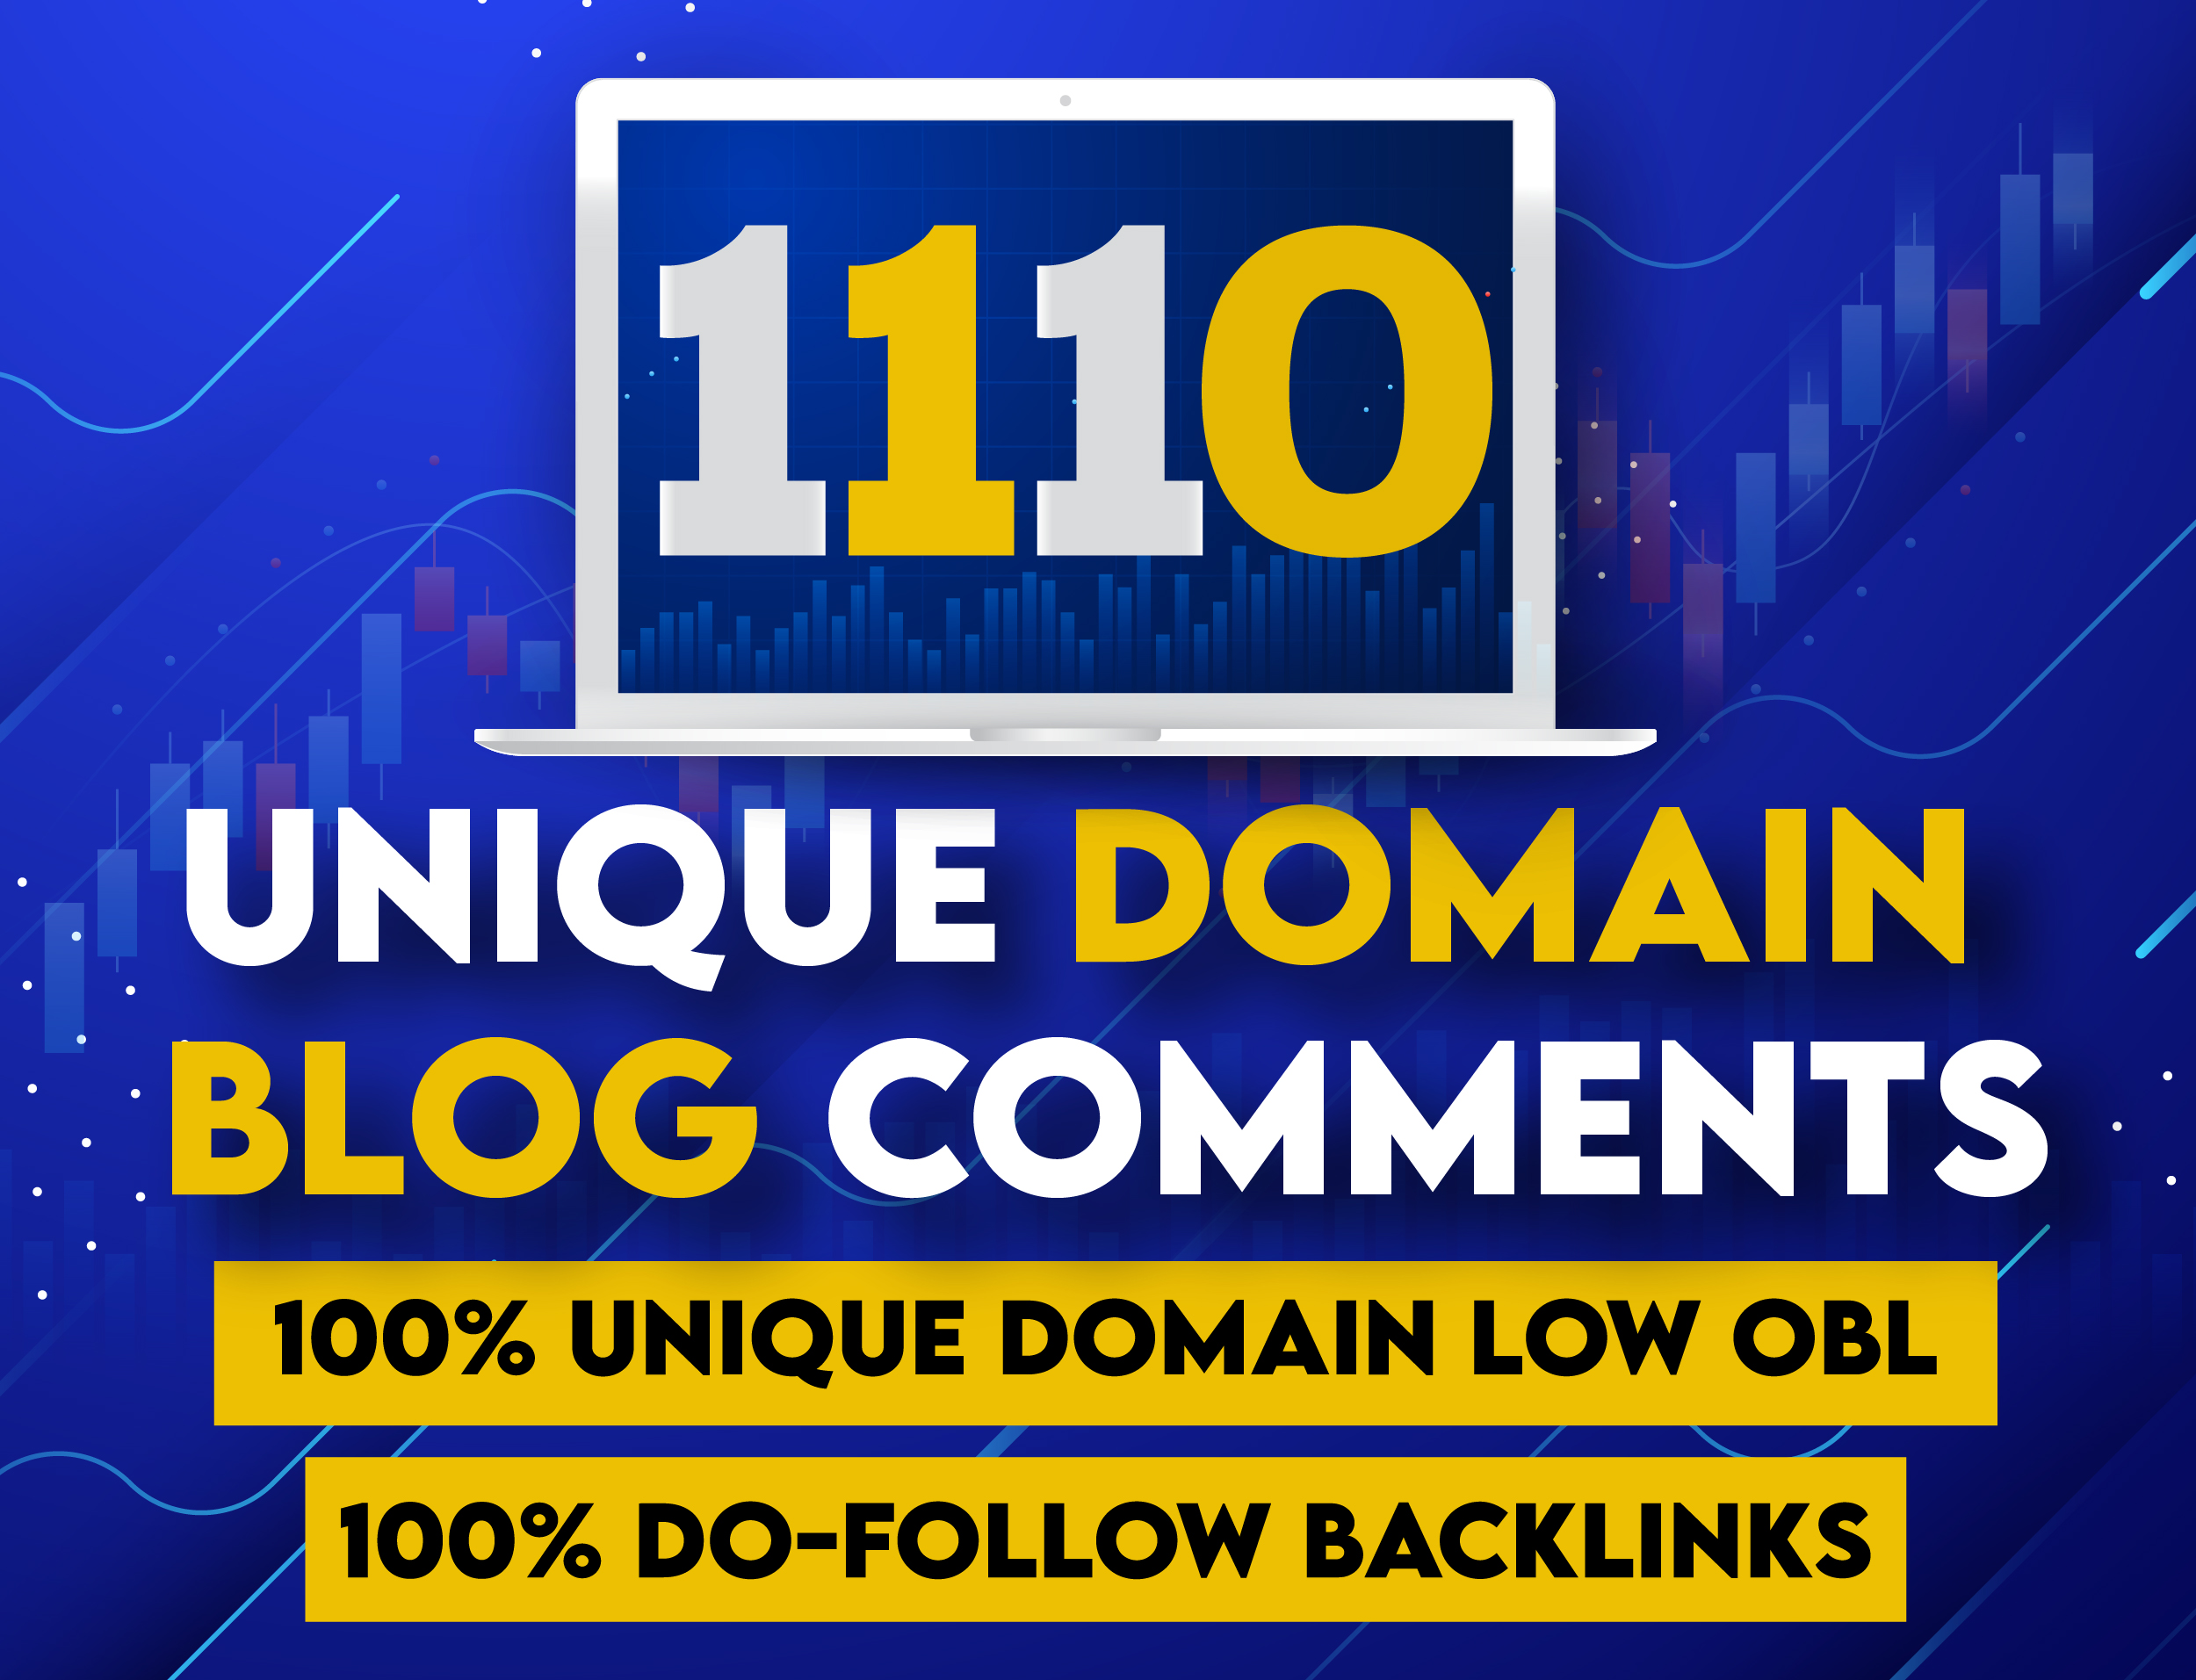 i will create 1110 unique domain dofollow blog comments backlinks with low obl high DA PA TF CF site